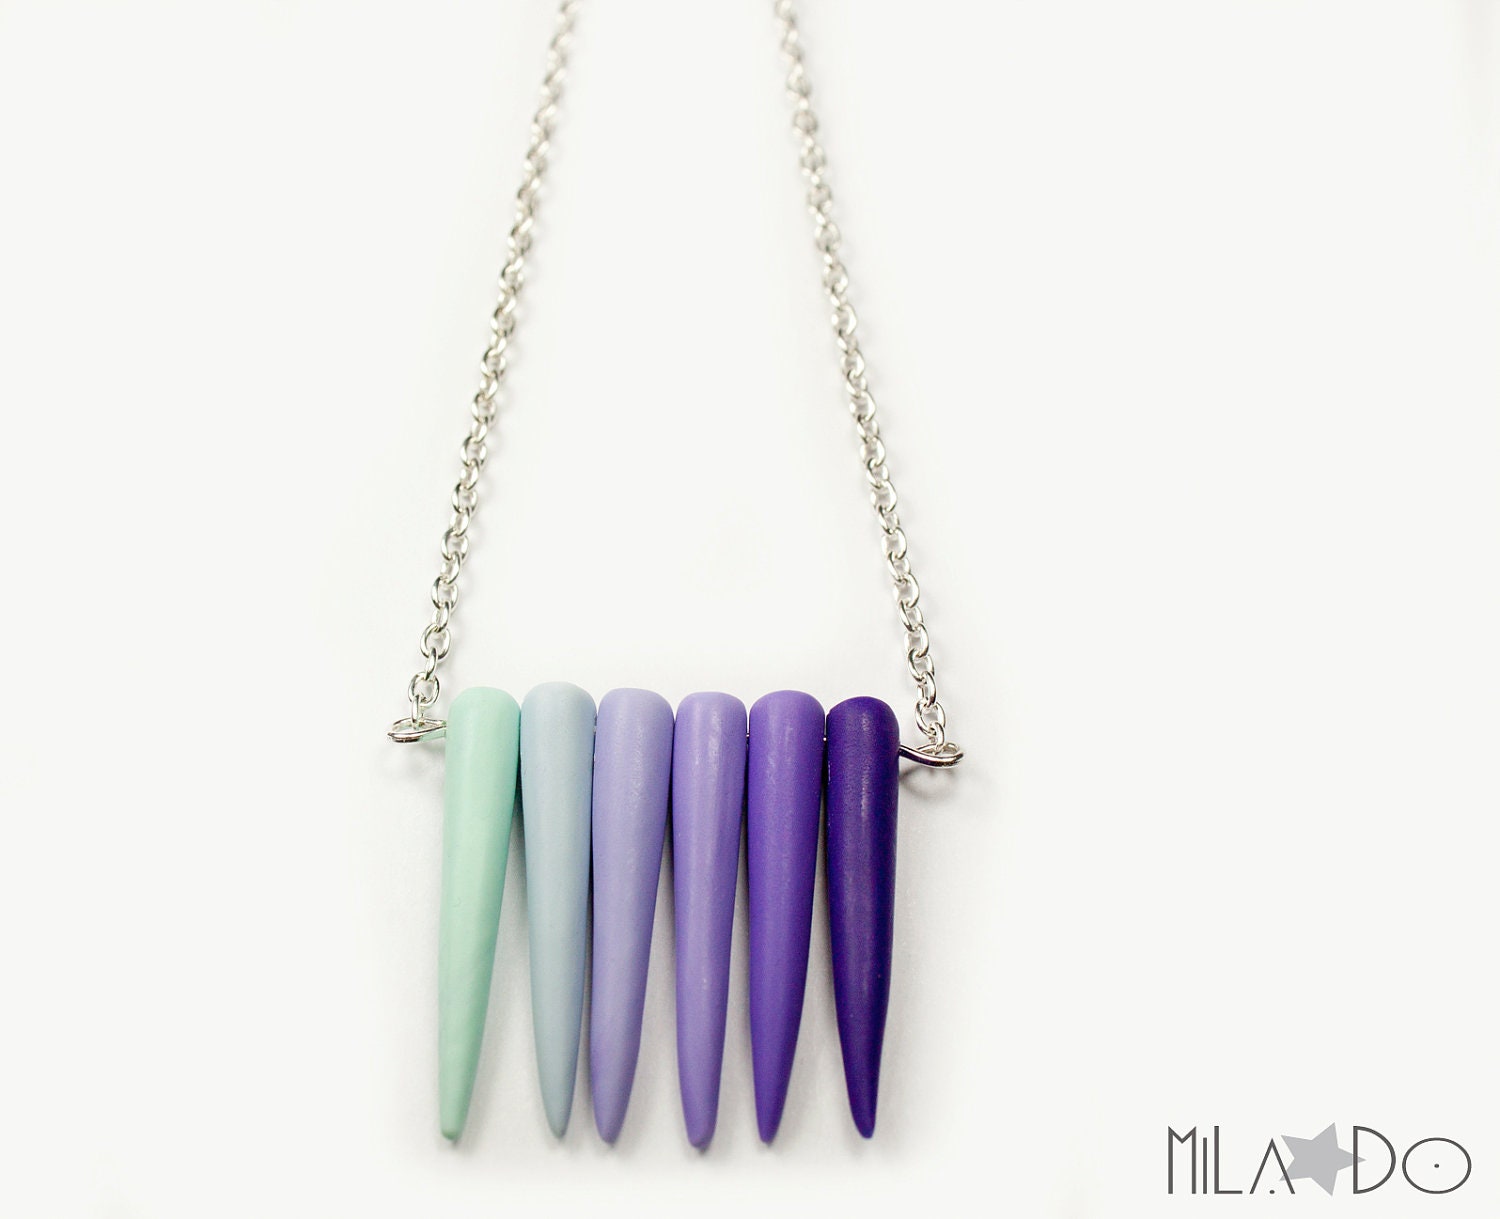 Tribal spikes necklace ombre mint purple - MiLaDo